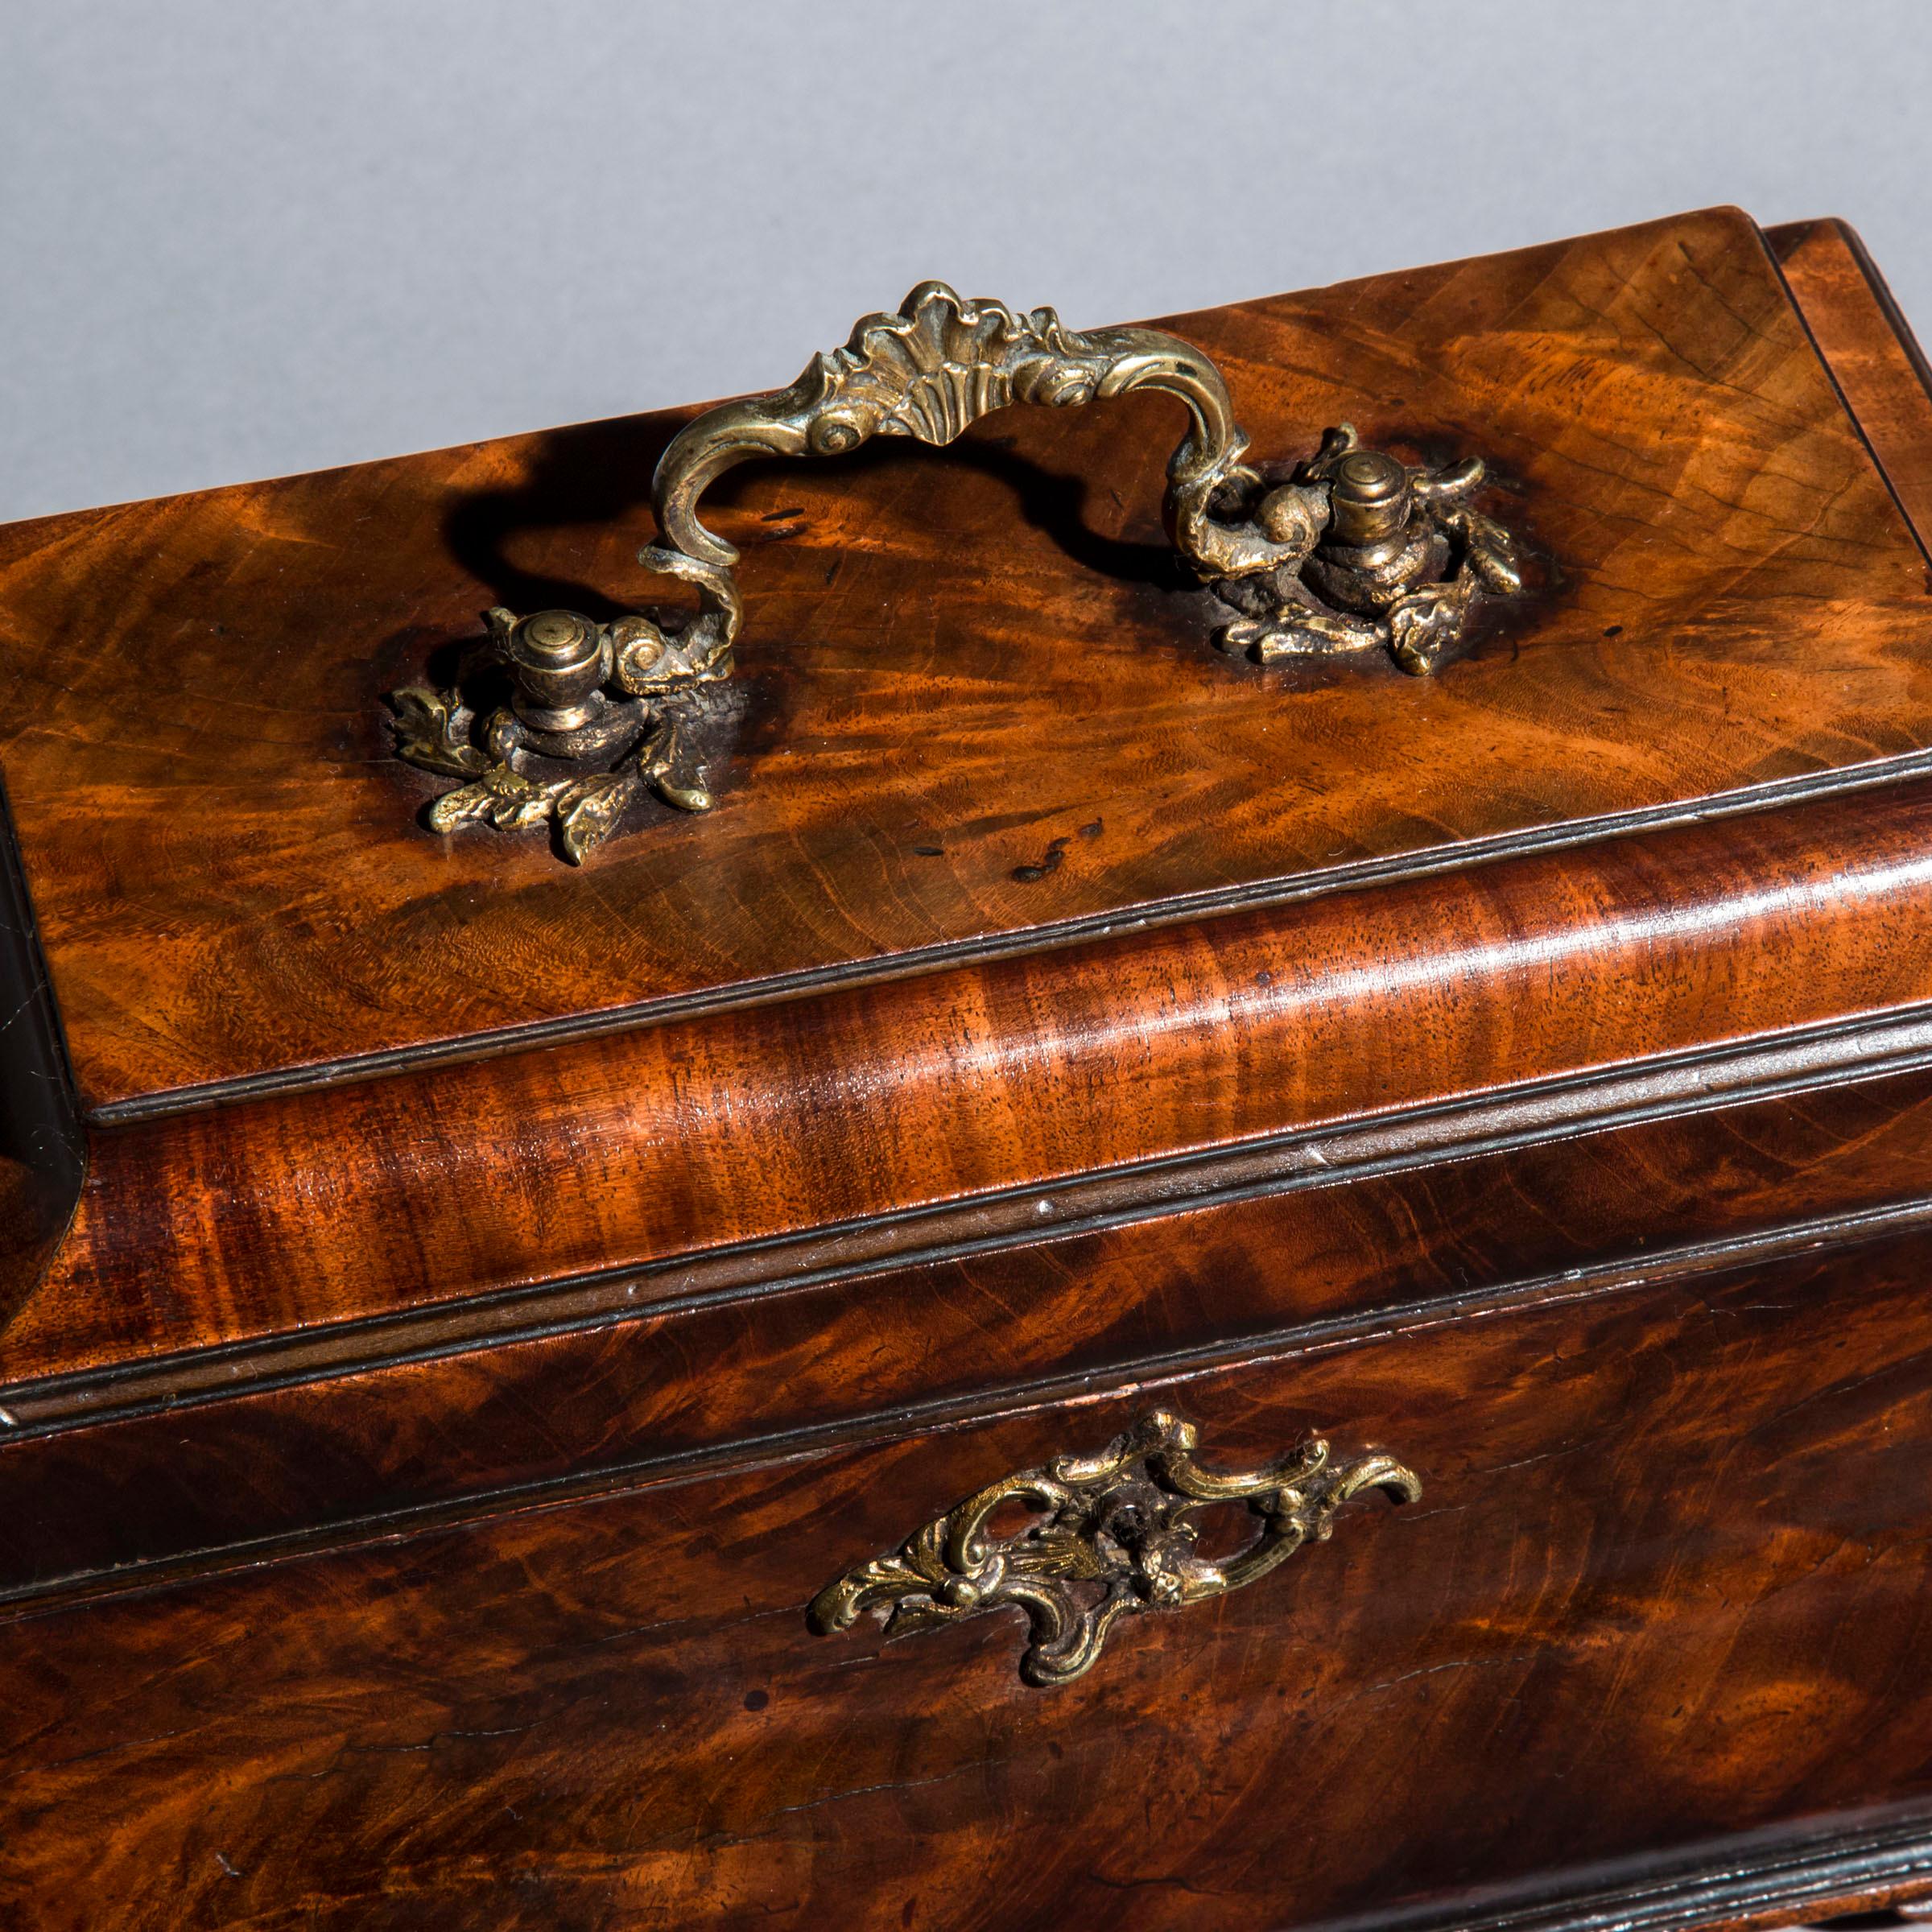 A rare matched pair of superb George III Chippendale bombé tea caddies, of splendid color and patination.
England, circa 1760.

Why we love them
Incredibly rare in this distinctive bombé form, these superb boxes display most wonderful color and